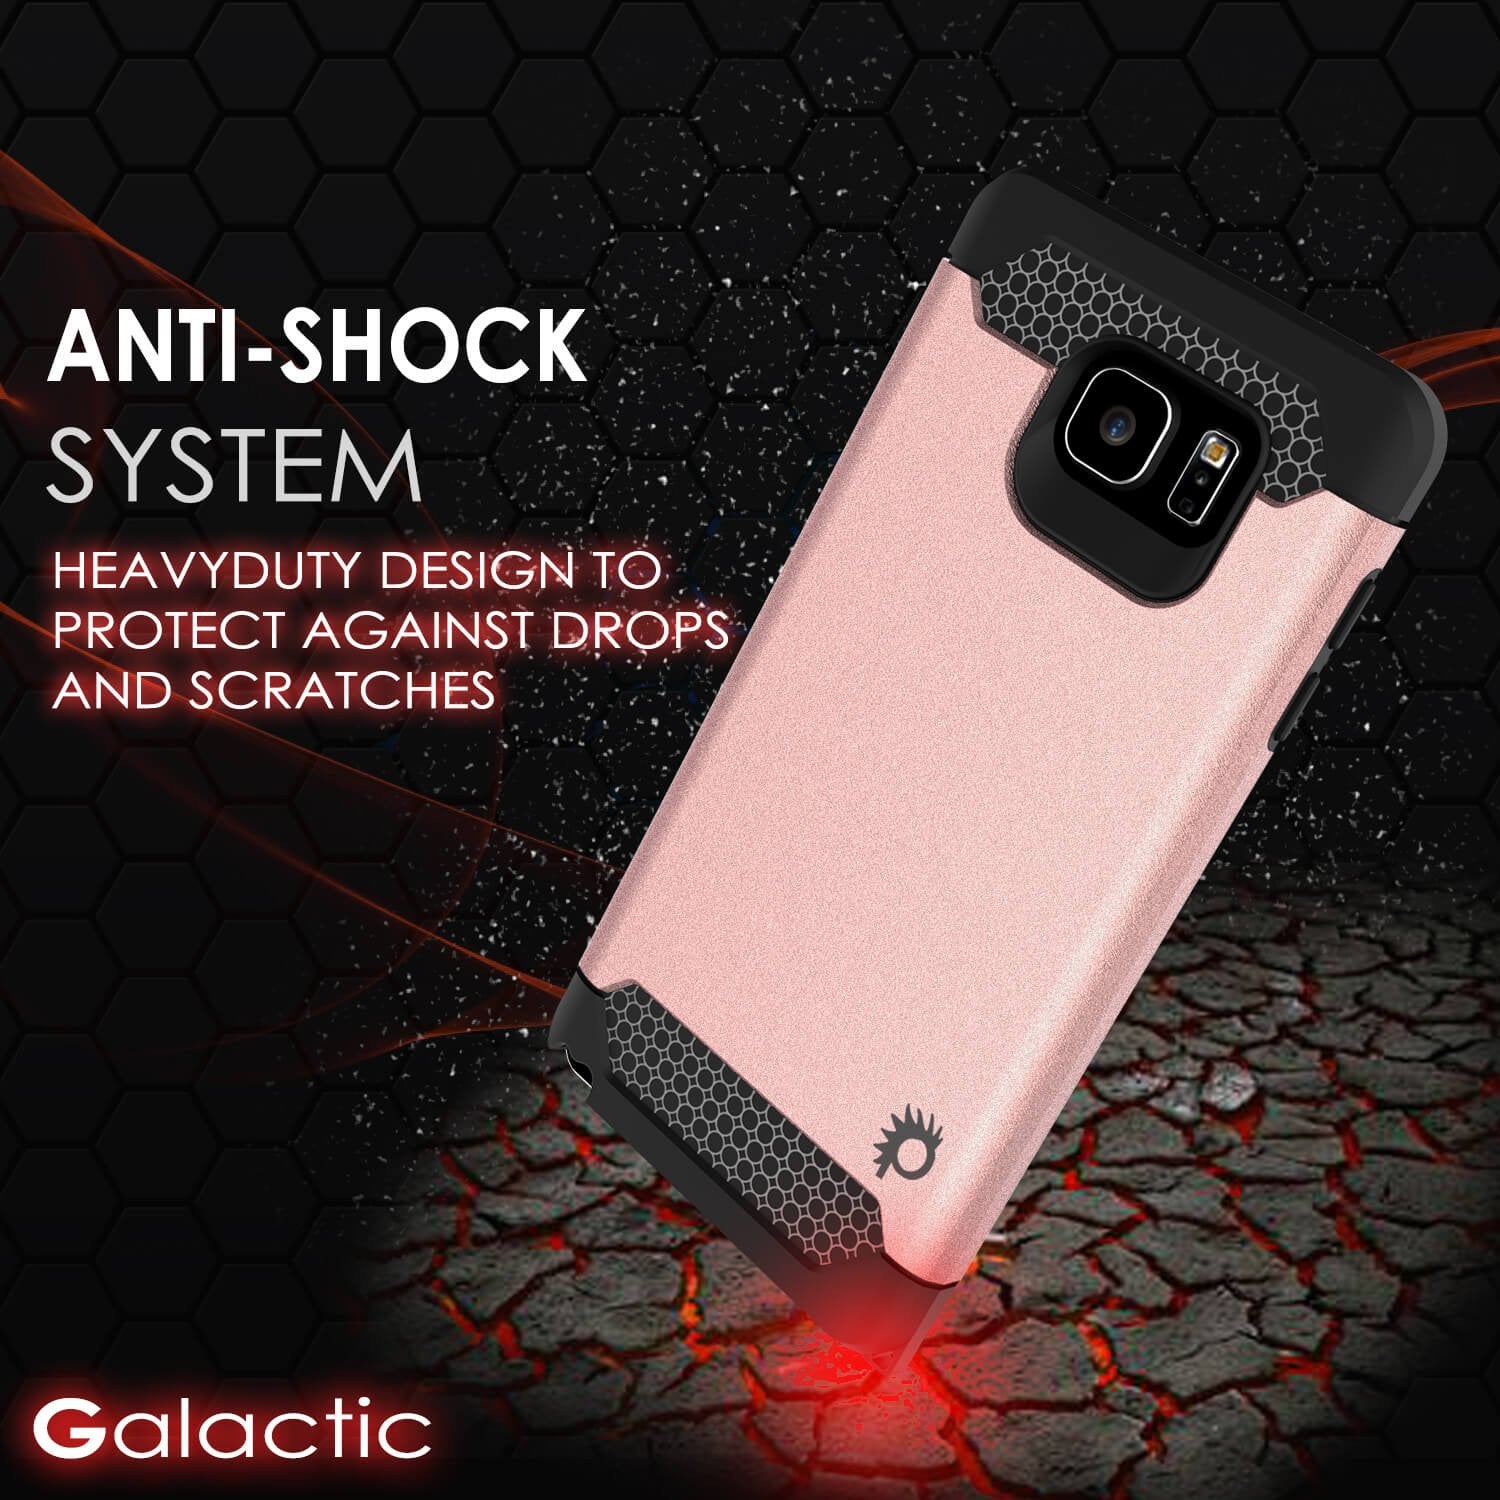 Galaxy Note 5 Case PunkCase Galactic Rose Gold Slim Armor Soft Cover Case w/ Tempered Glass - PunkCase NZ